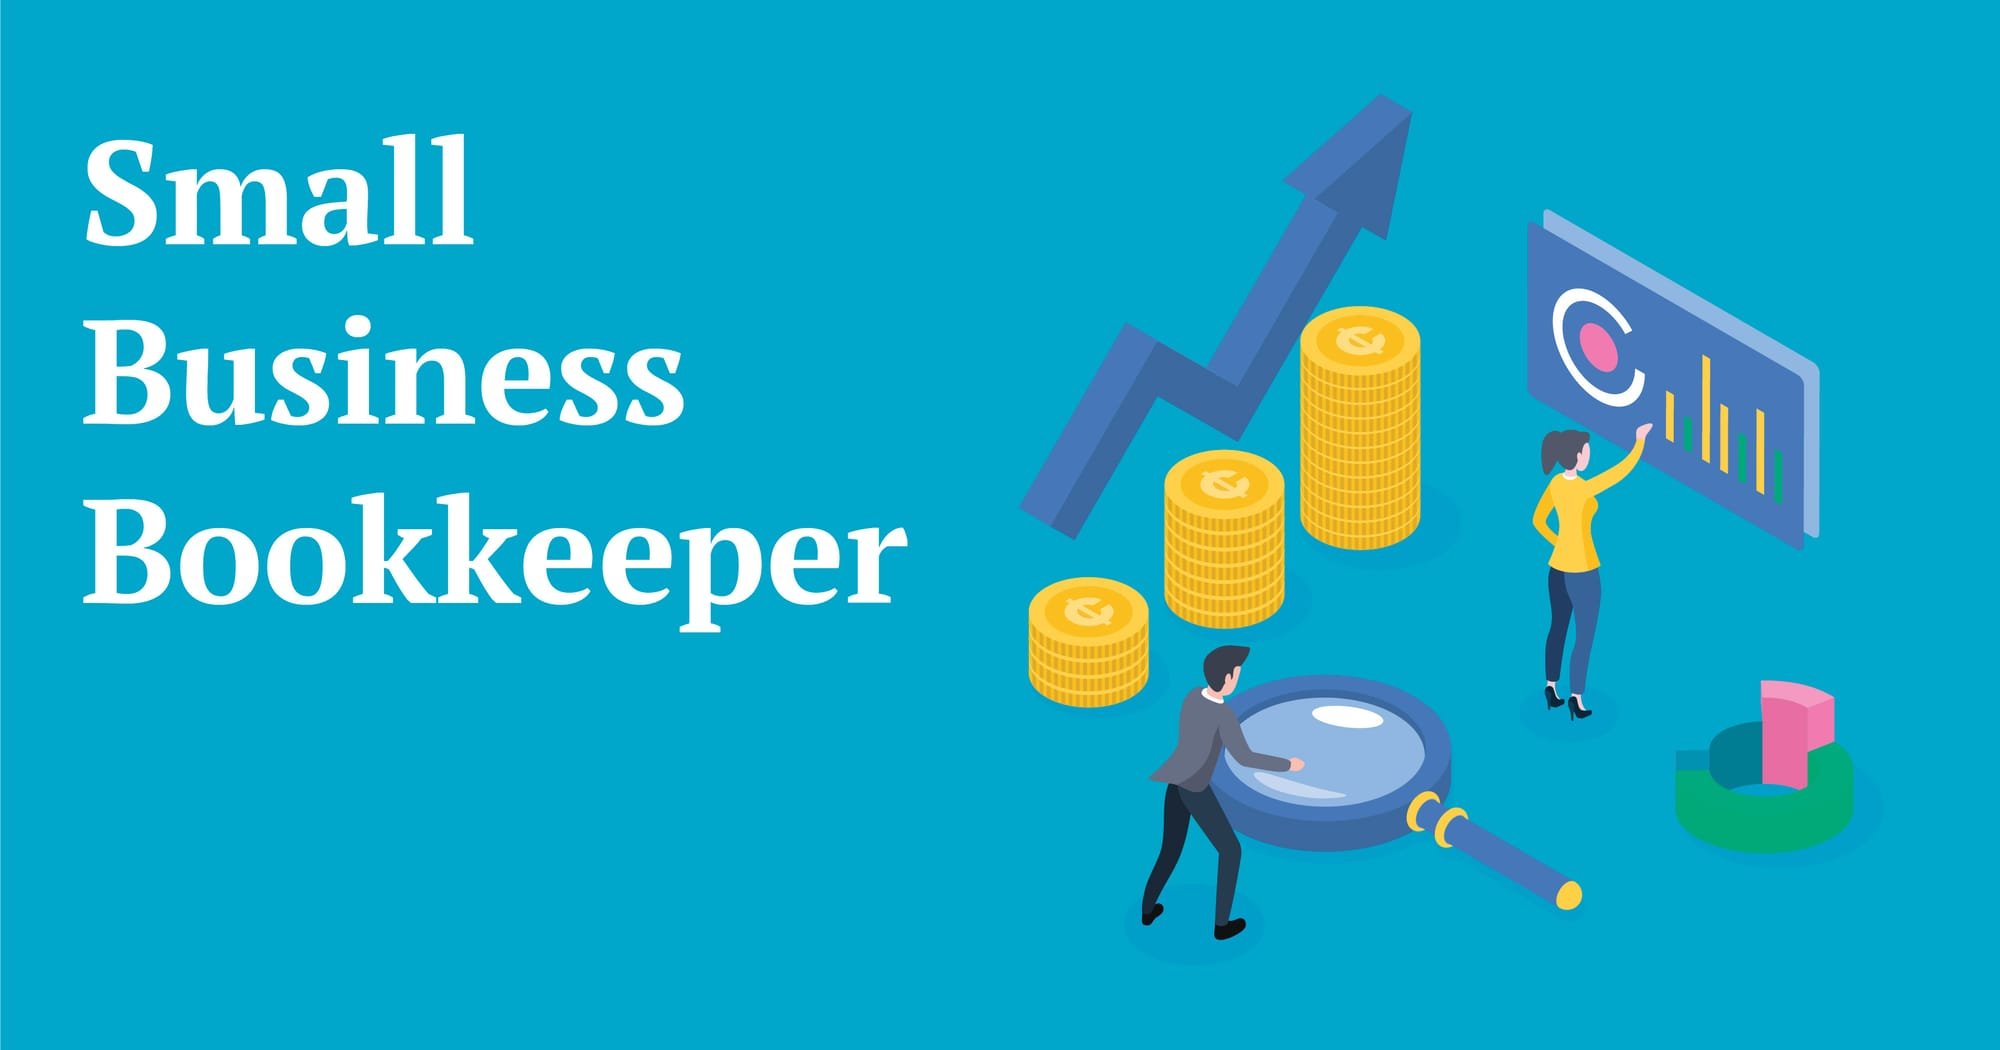 Small business bookkeeping for beginners